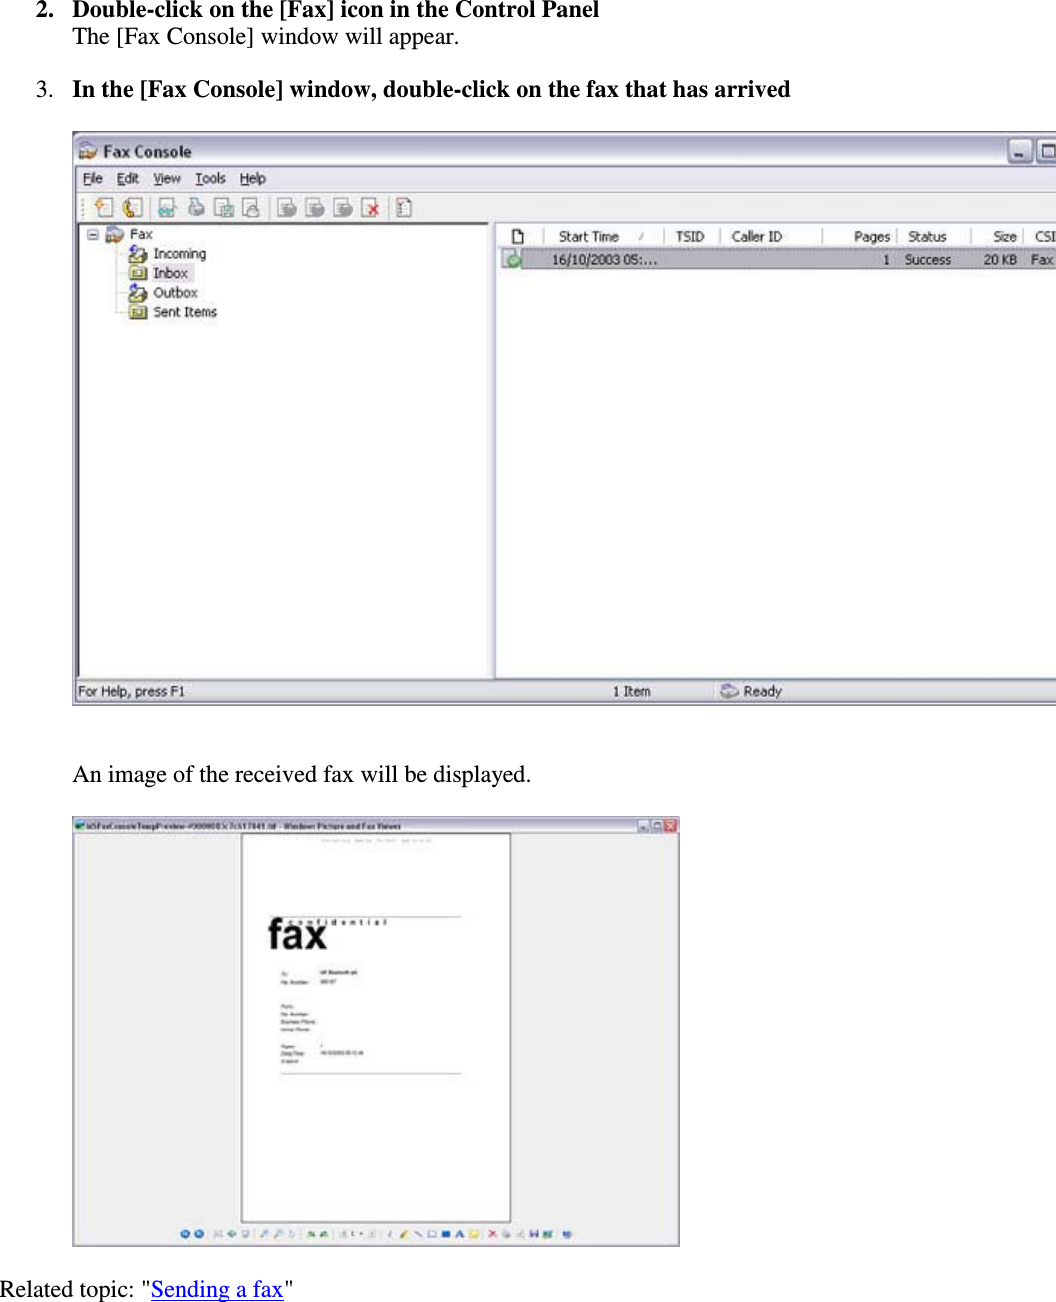 2. Double-click on the [Fax] icon in the Control PanelThe [Fax Console] window will appear.3. In the [Fax Console] window, double-click on the fax that has arrivedAn image of the received fax will be displayed.Related topic: &quot;Sending a fax&quot;